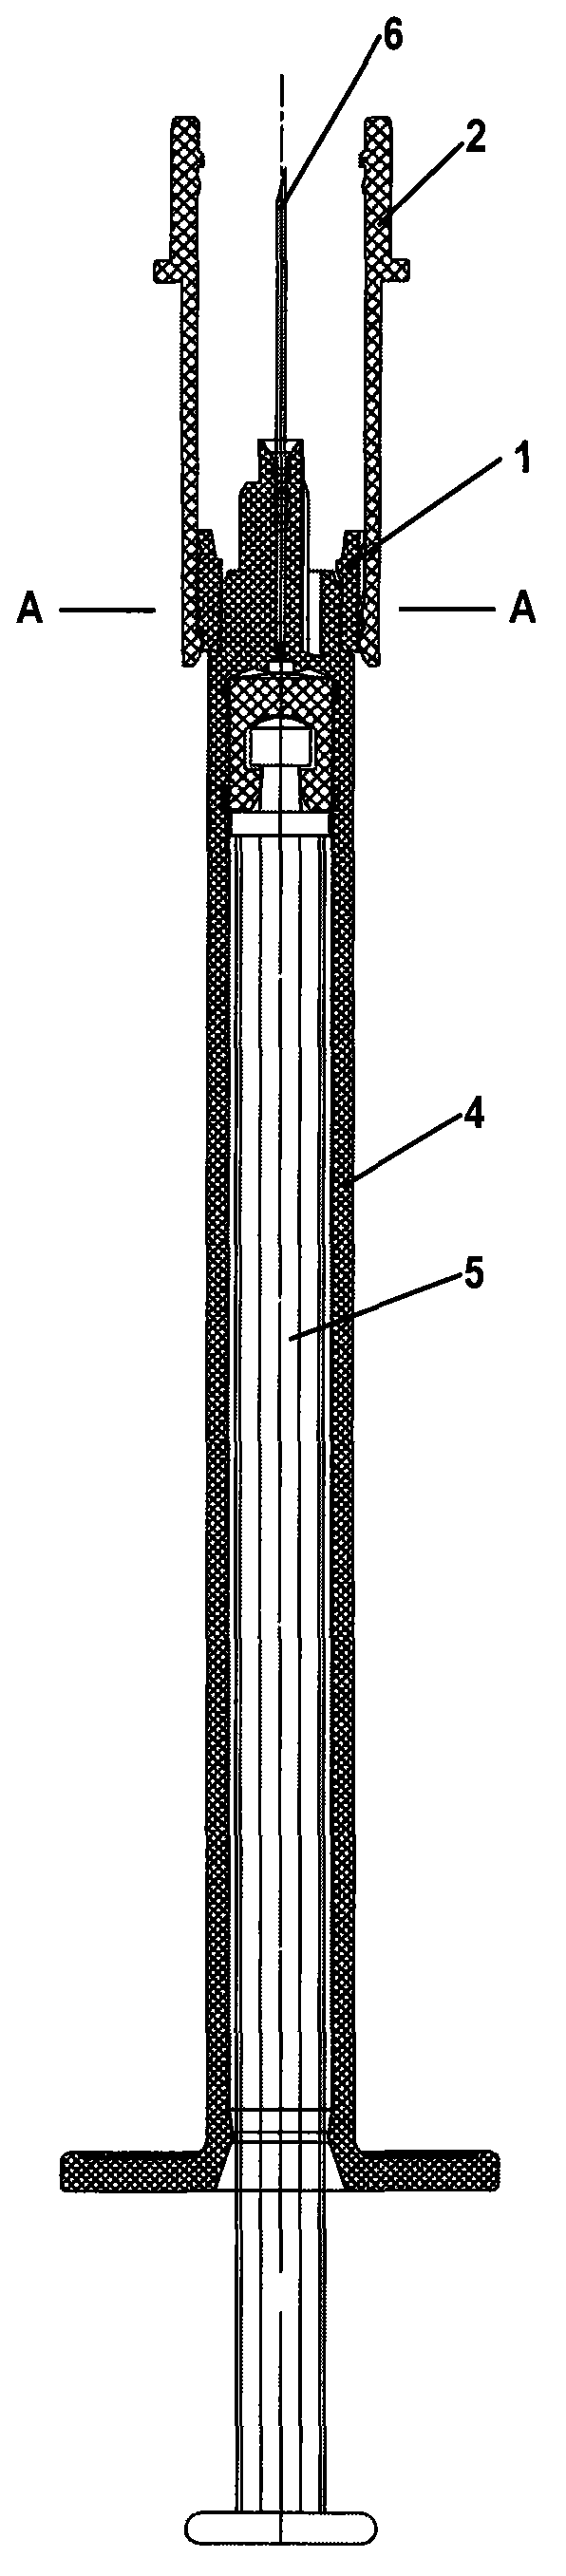 Pin head protective device and safety pin assembly